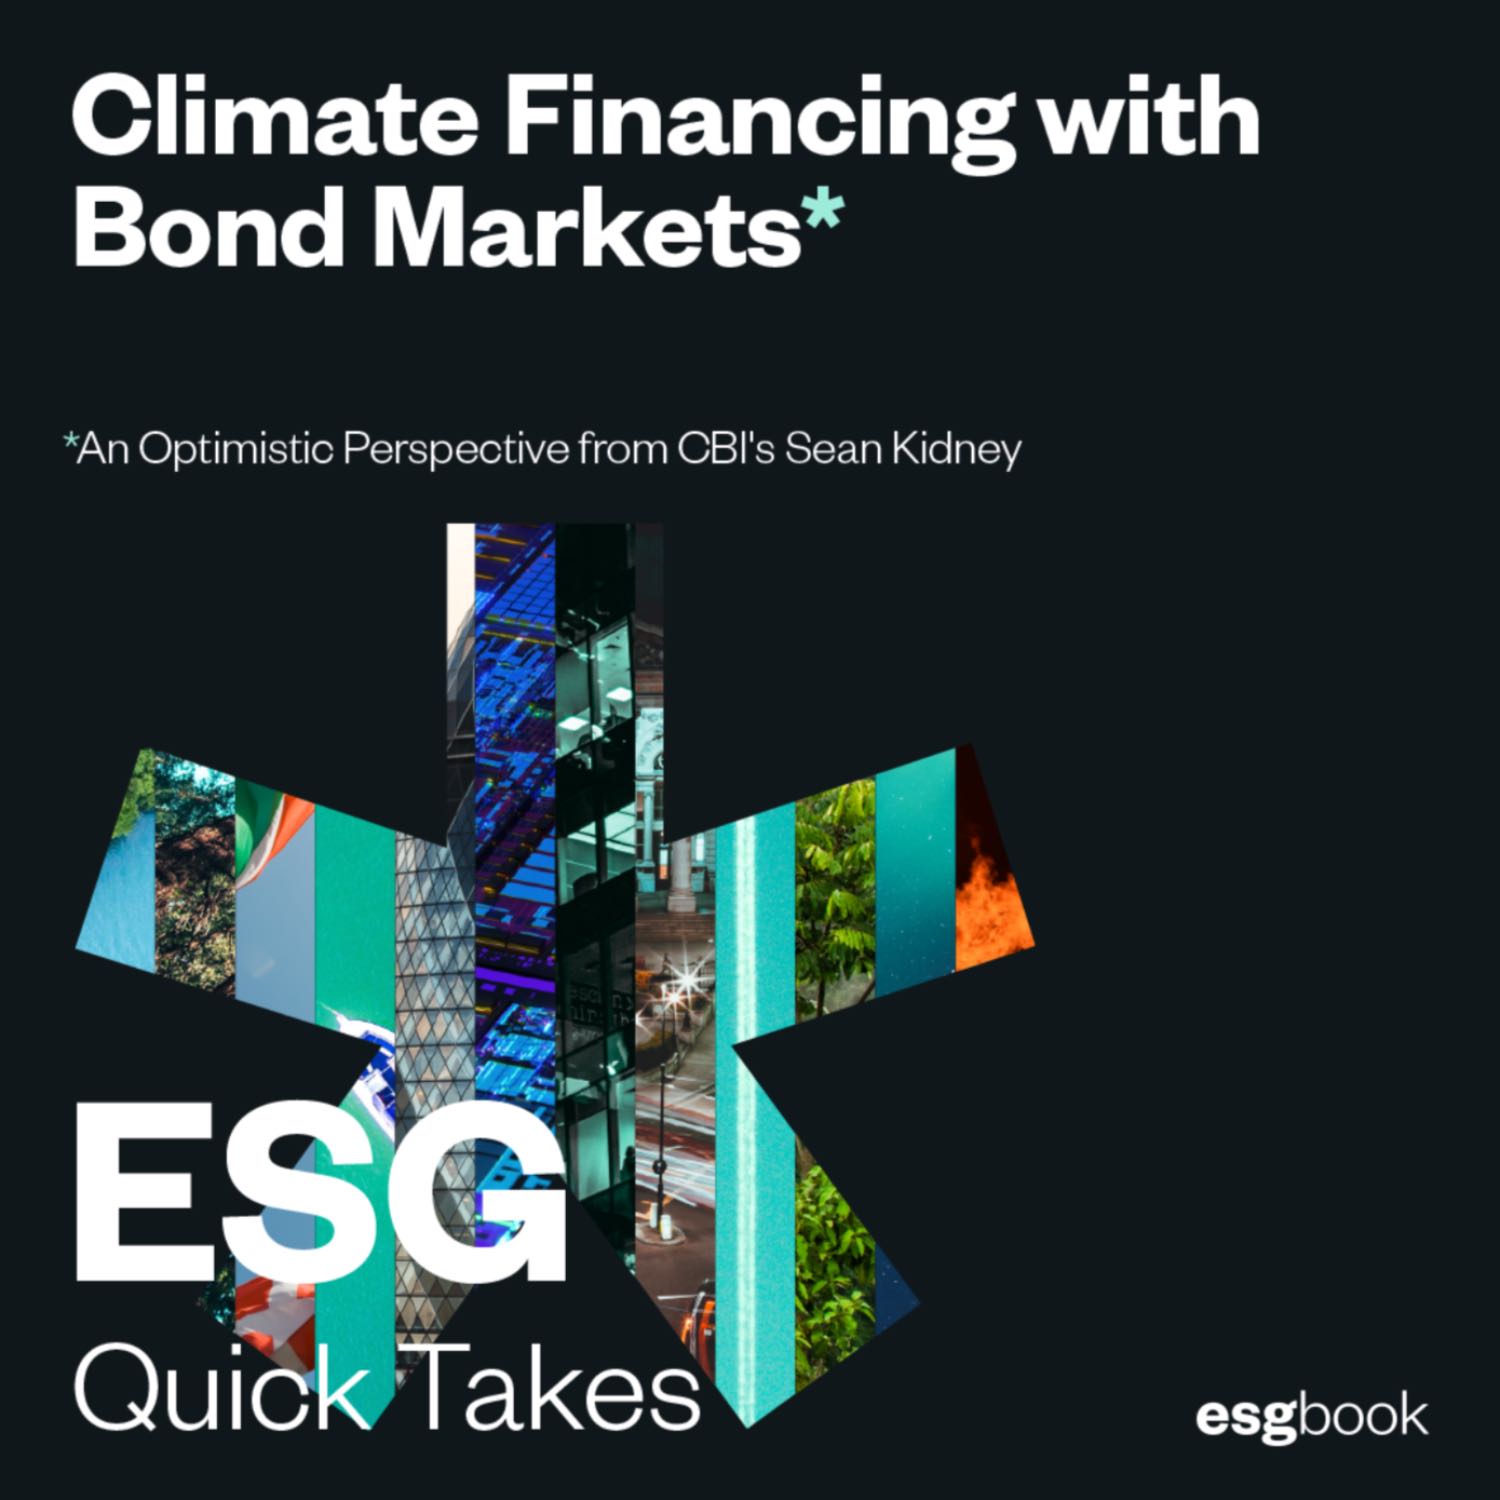 Climate Financing with Bond Markets: An Optimistic Perspective from CBI's Sean Kidney